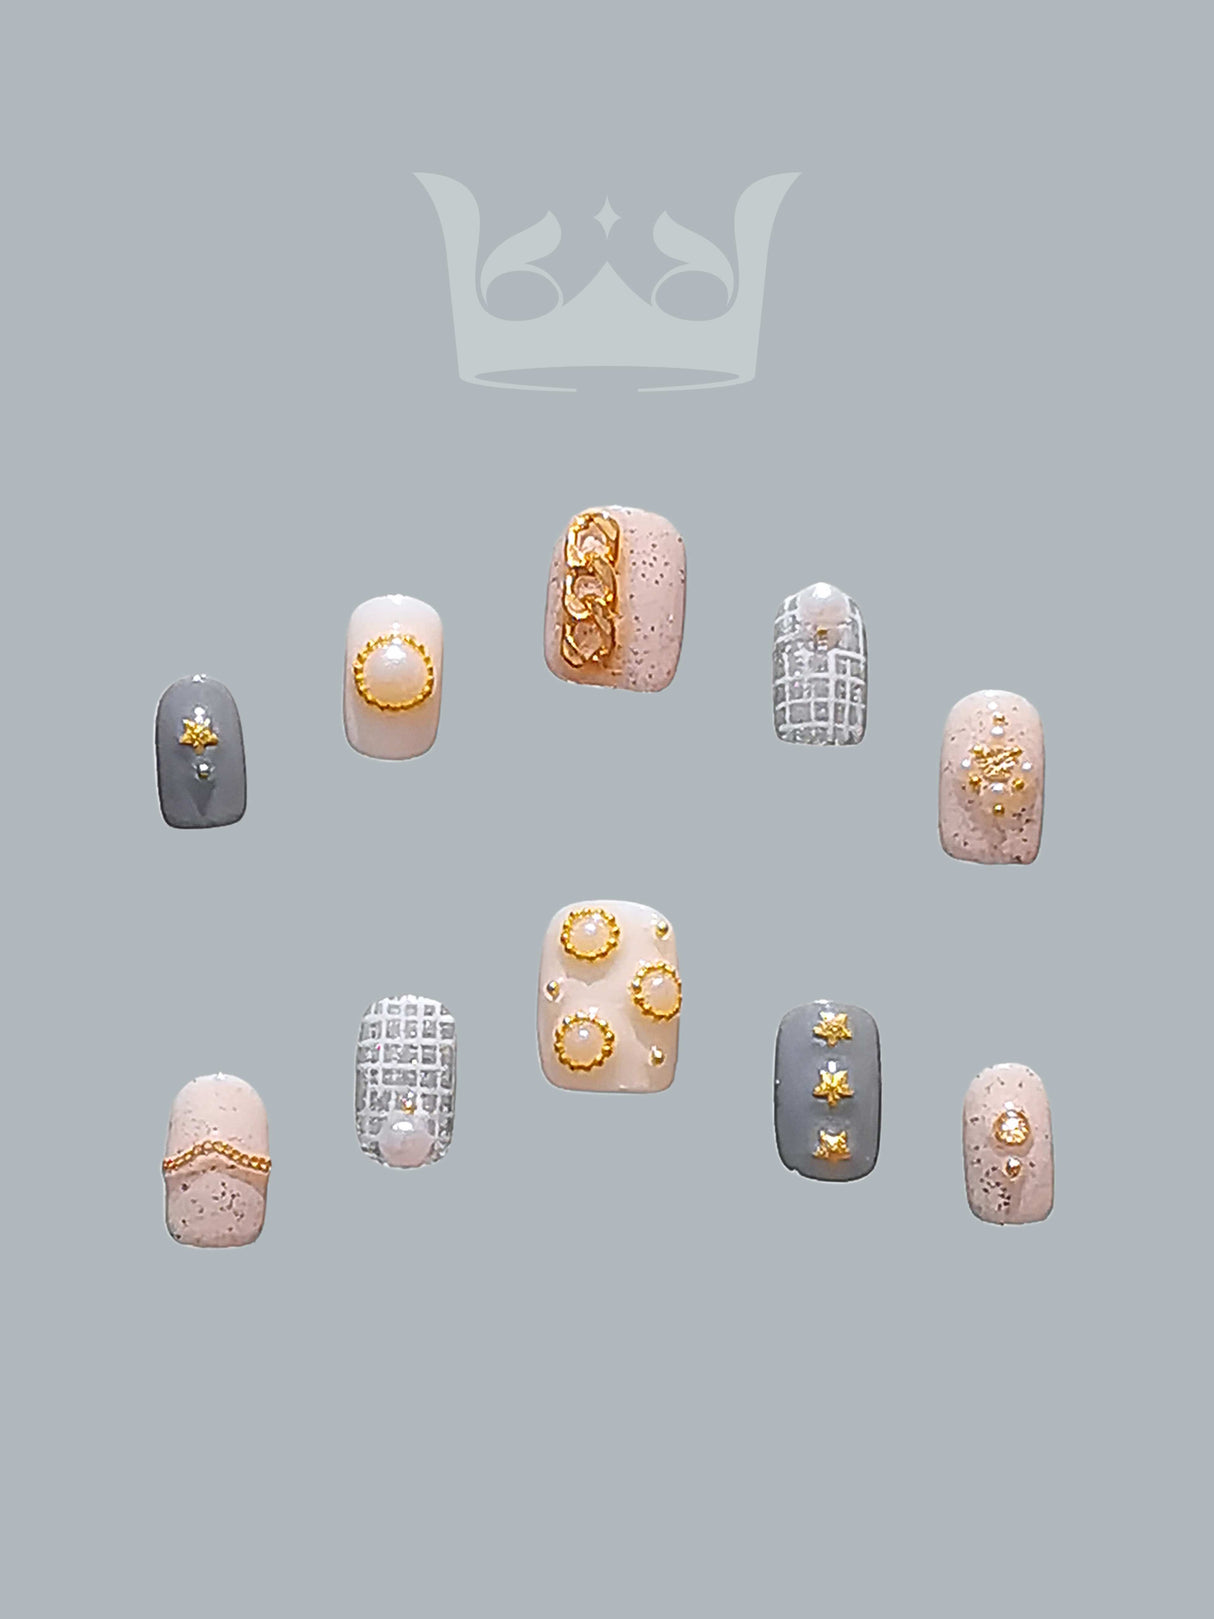 Luxurious and ornate nails with pearls, beads, jewel embellishments, metallic accents, and studded details make a bold fashion statement for special occasions.